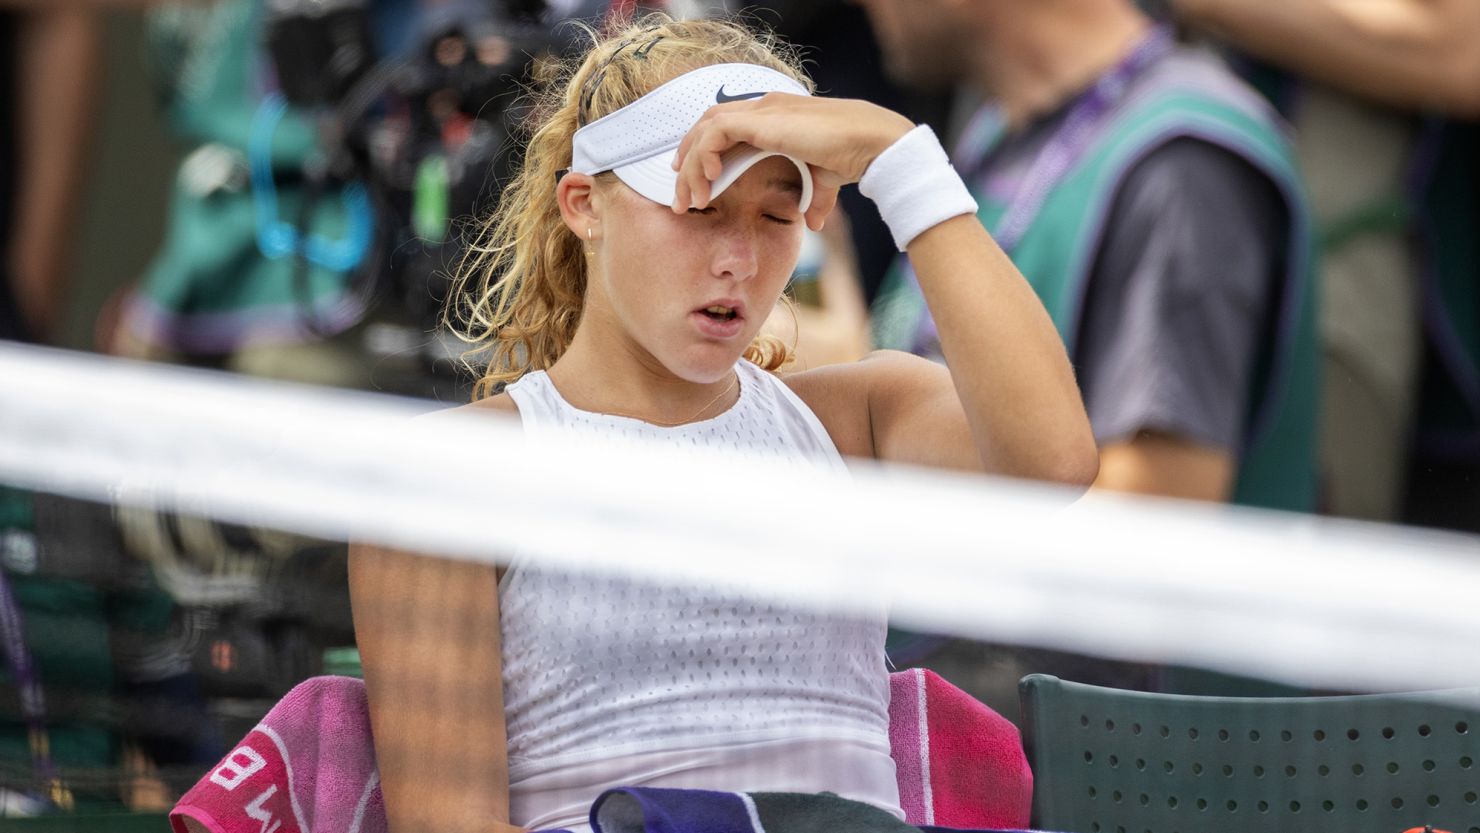 LONDON, ENGLAND - JULY 10.   Mirra Andreeva of Russia in tears in the third set during her loss to Madison Keys of the United States in the Ladies' Singles fourth-round match on Court Two during the Wimbledon Lawn Tennis Championships at the All England Lawn Tennis and Croquet Club at Wimbledon on July 10, 2023, in London, England. (Photo by Tim Clayton/Corbis via Getty Images)